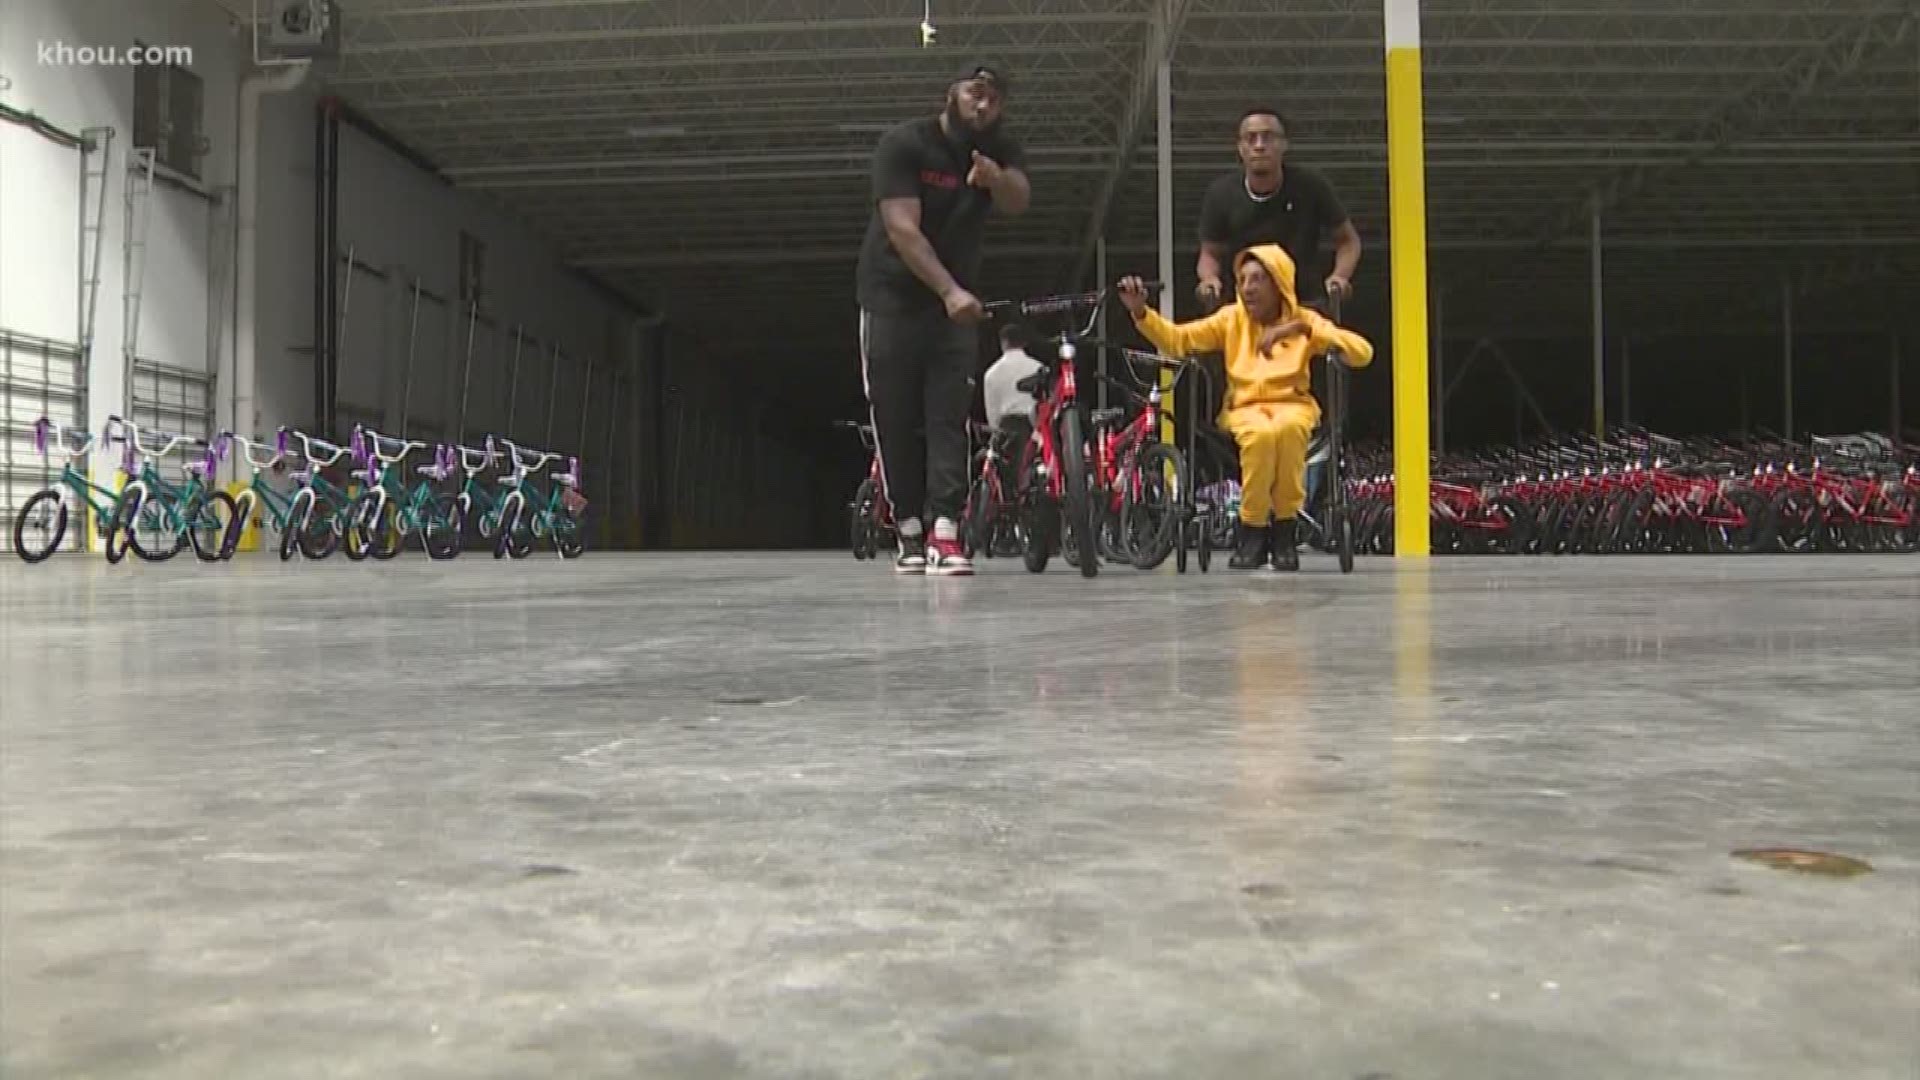 The Relief Gang, Trae tha Truth and Altus Foundation teamed up to give 150 bicycles away to families near Greenspoint.